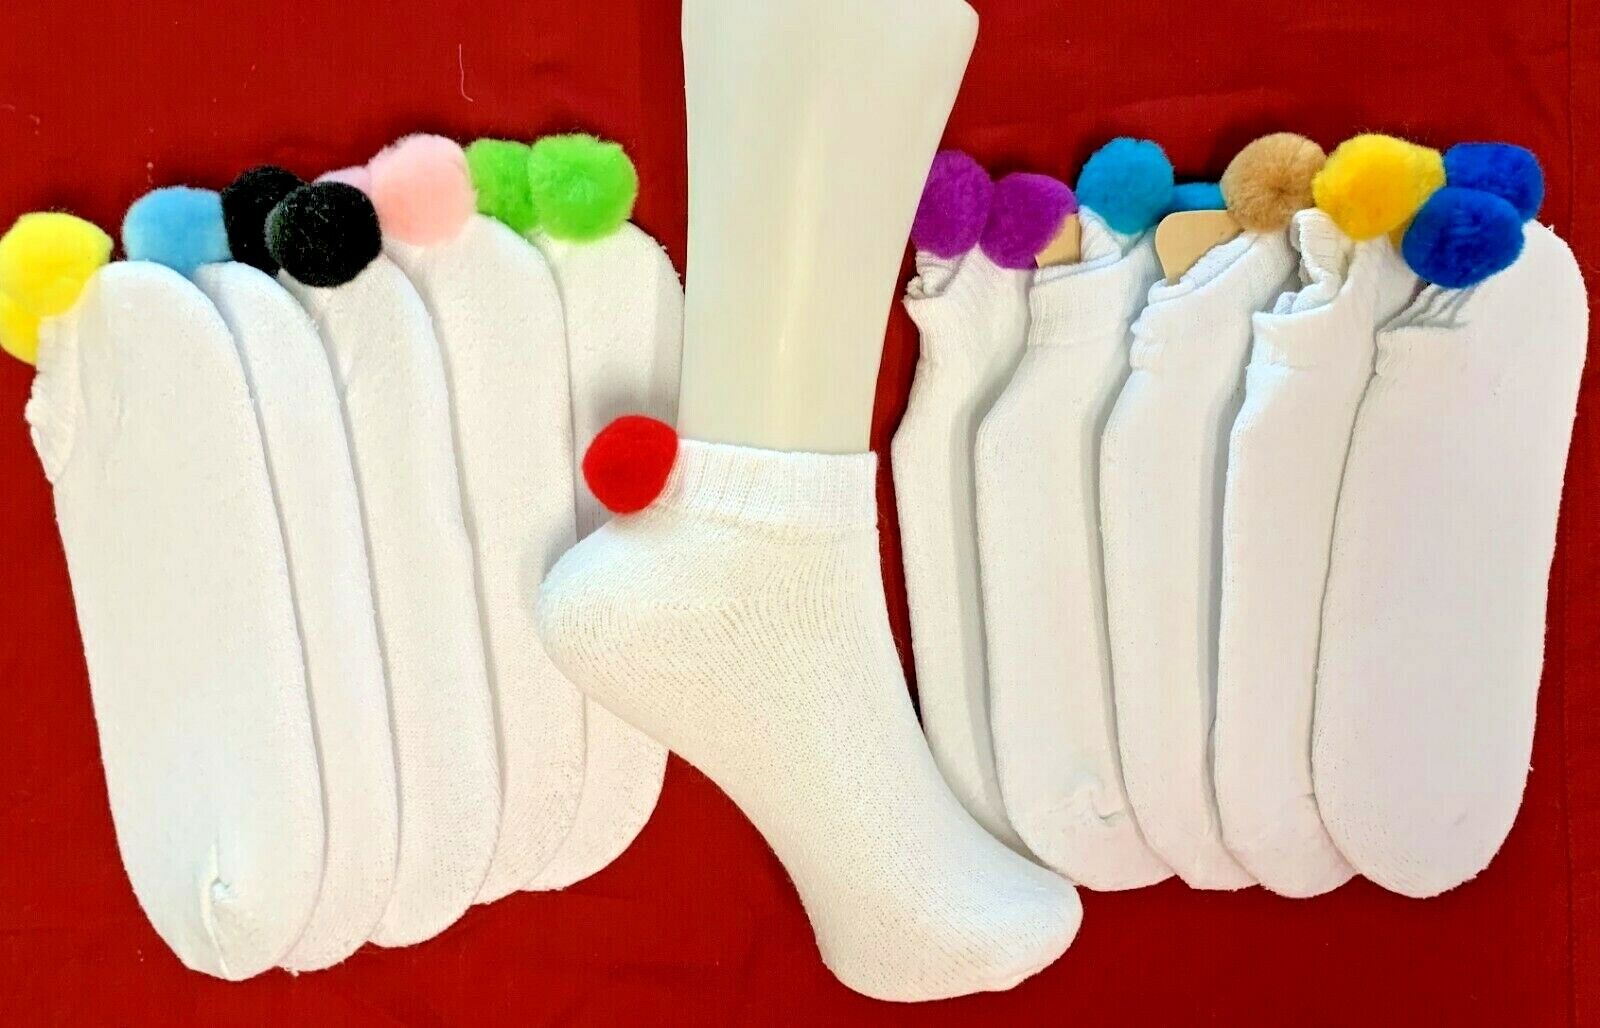 Women's POM POM SOCKS * Short Ankle WIth Ball - MIXED COLORS   - 10 Pair Unbranded